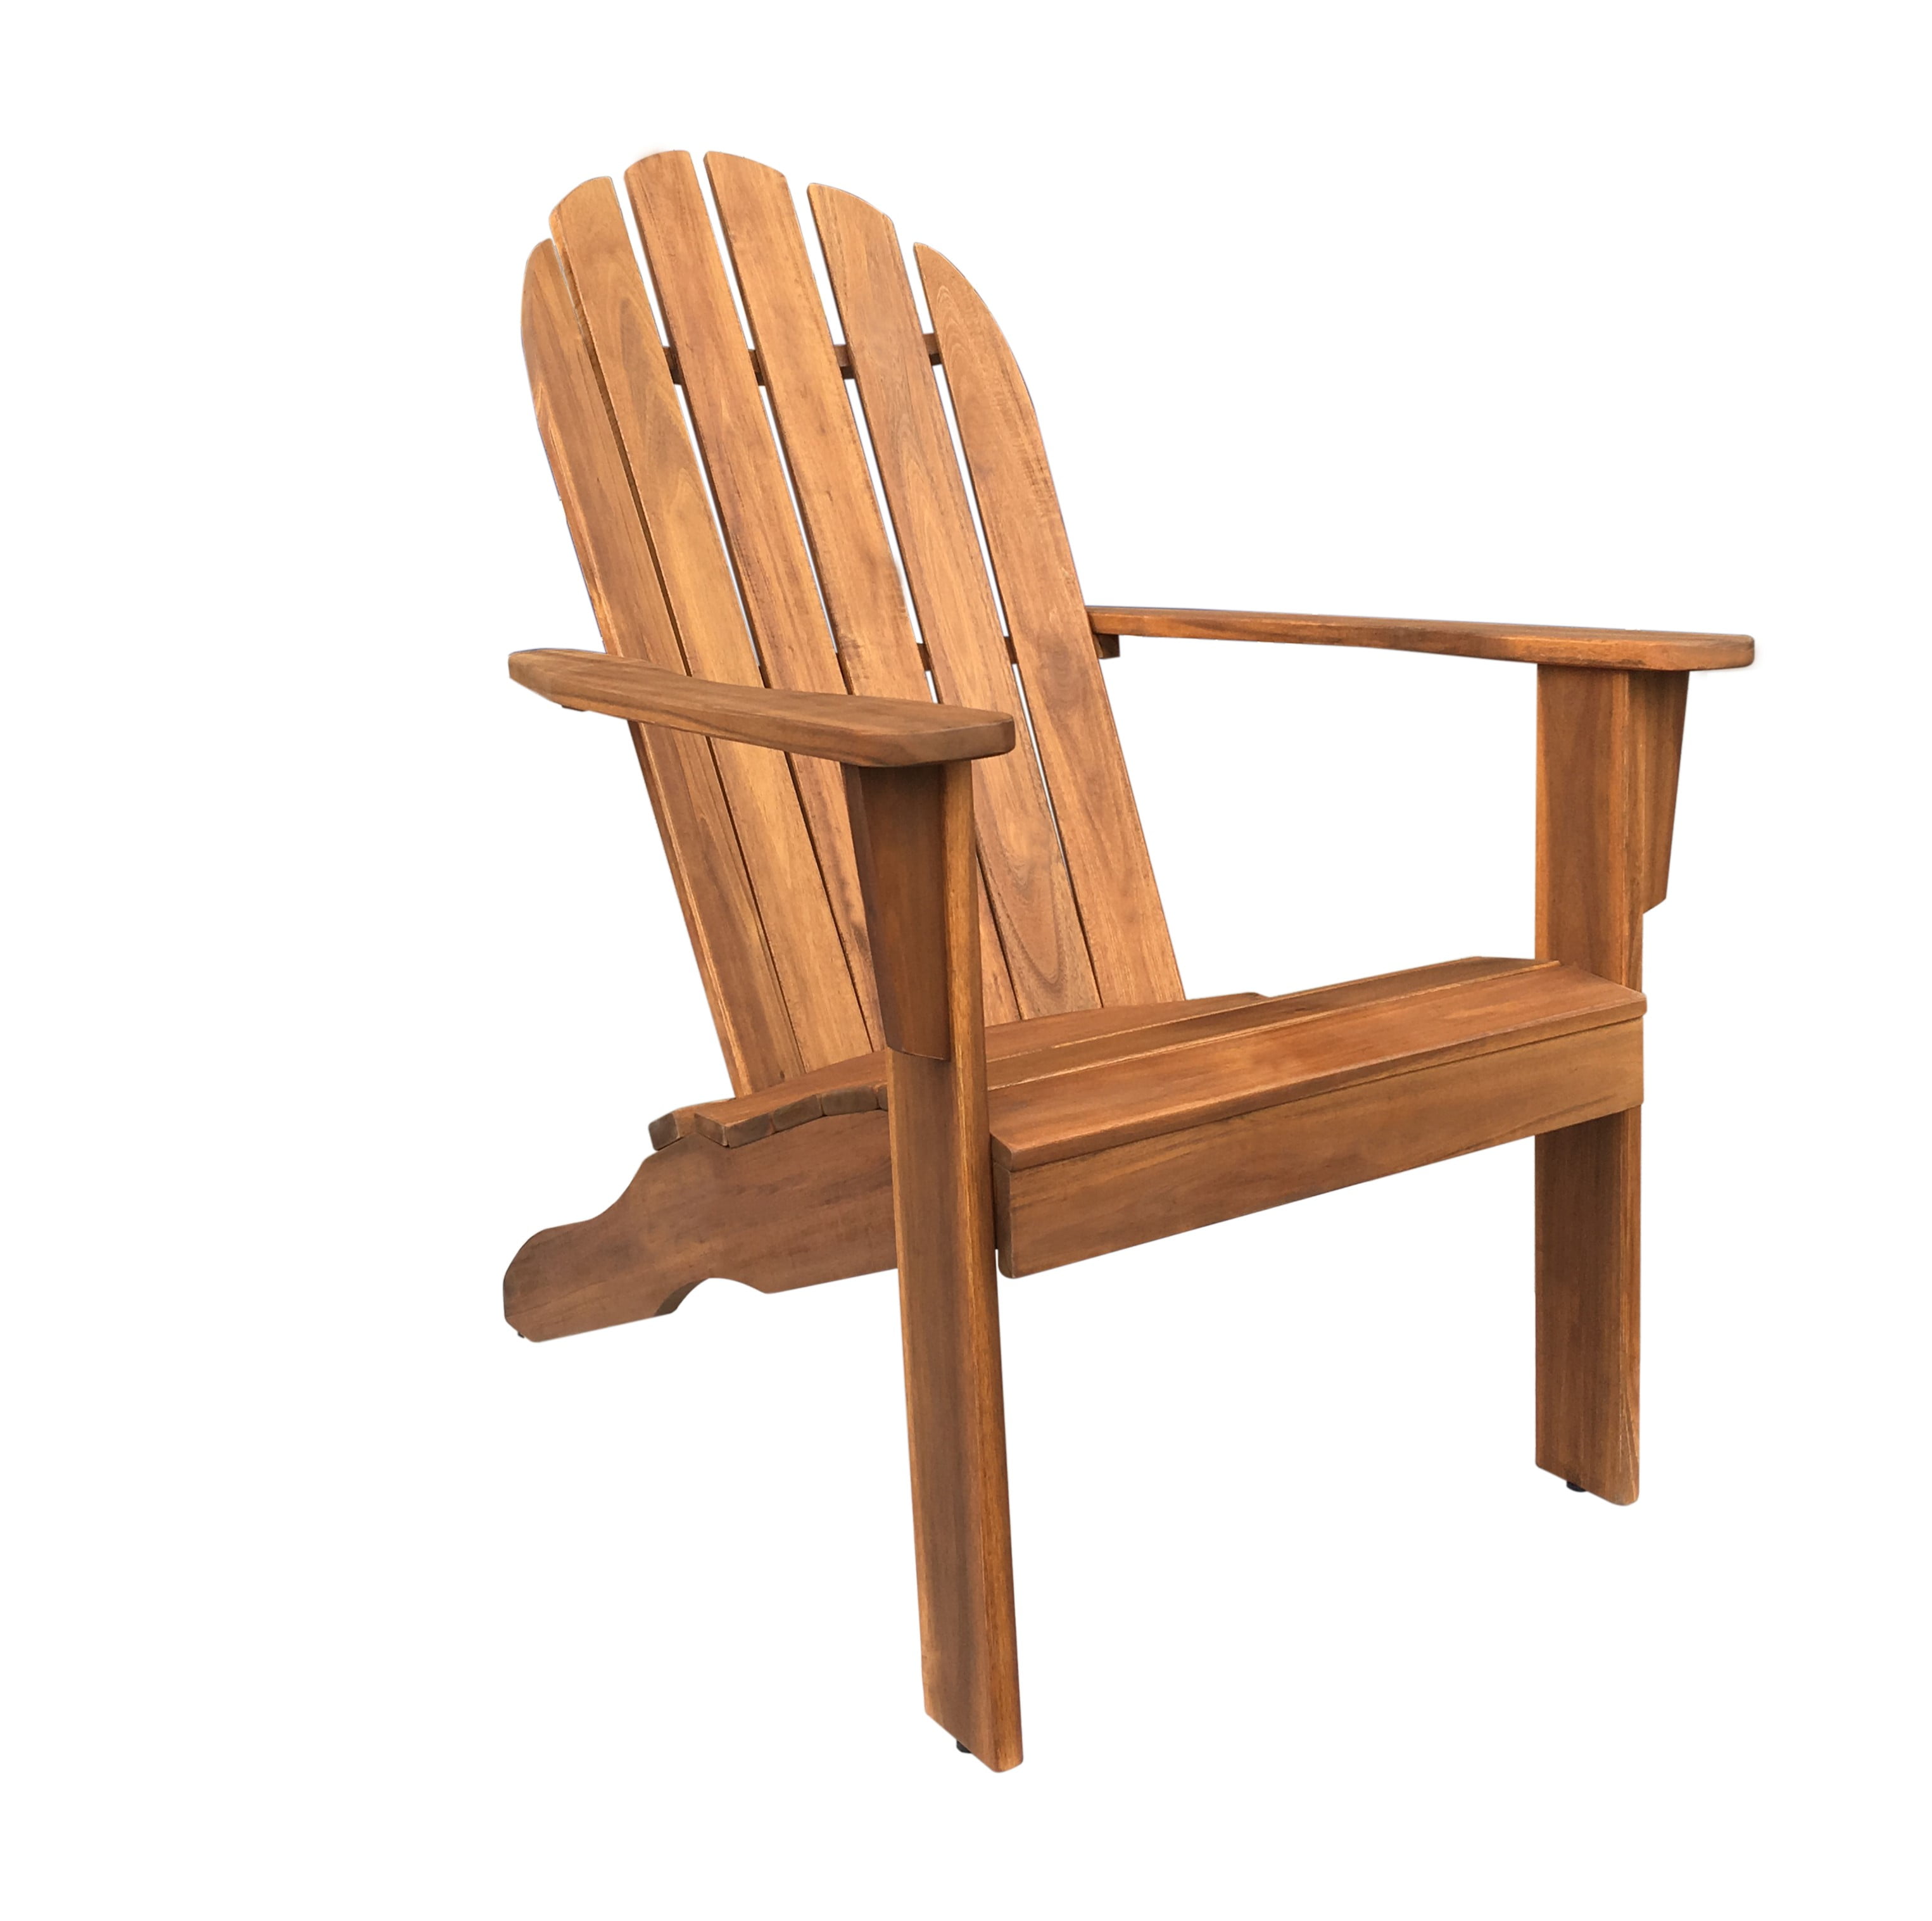 Solid Hardwood full color Mainstay Outdoor Adirondack Chair 